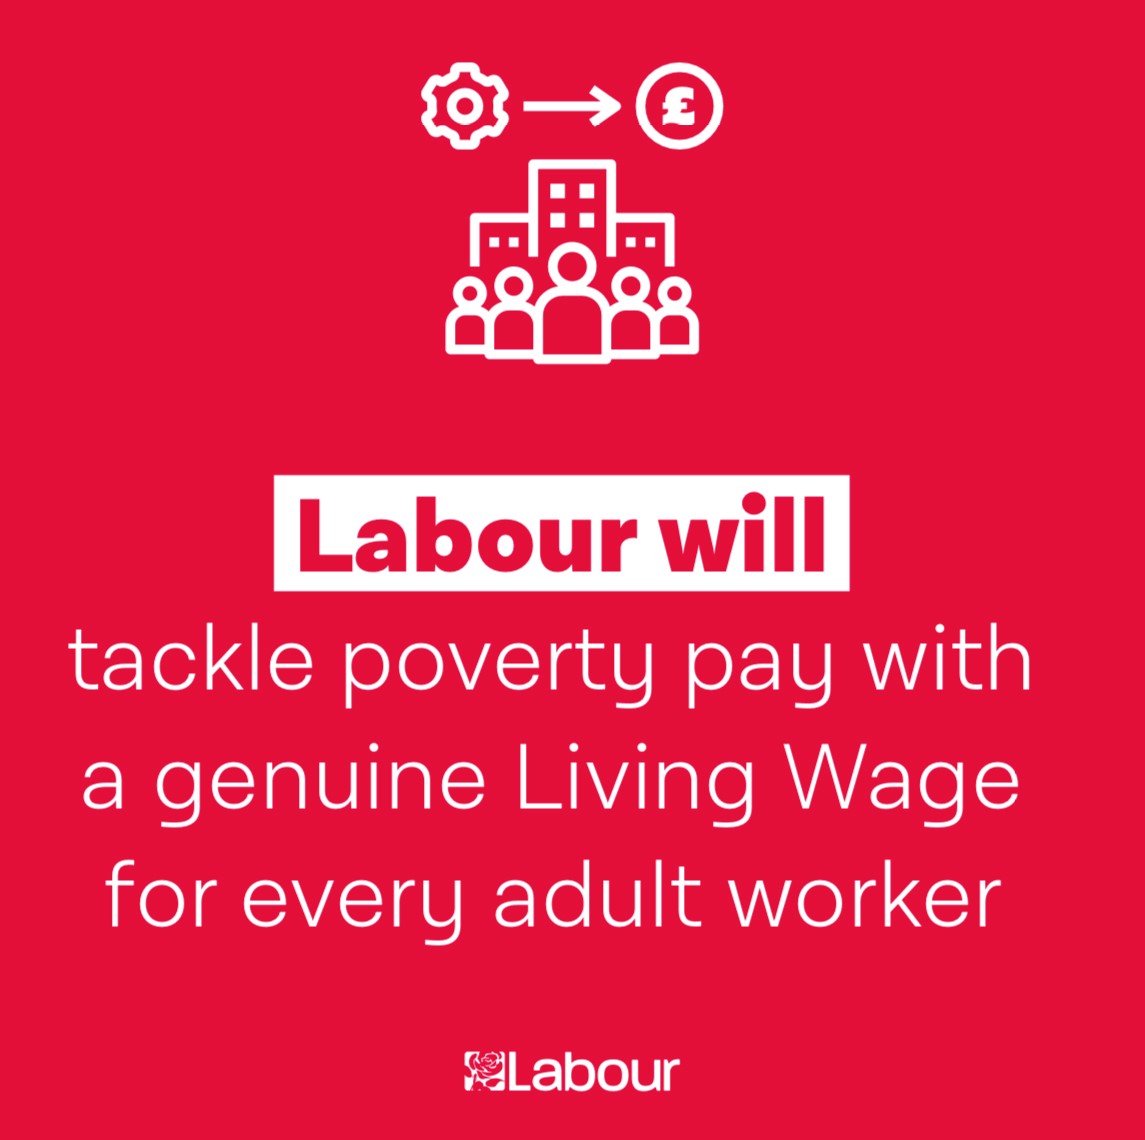 Really proud to be a member of a party committed to tackling the #CostOfLivingCrisis and part of a Labour administration @OxfordCity putting this into practice by paying and advocating for the #OxfordLivingWage.